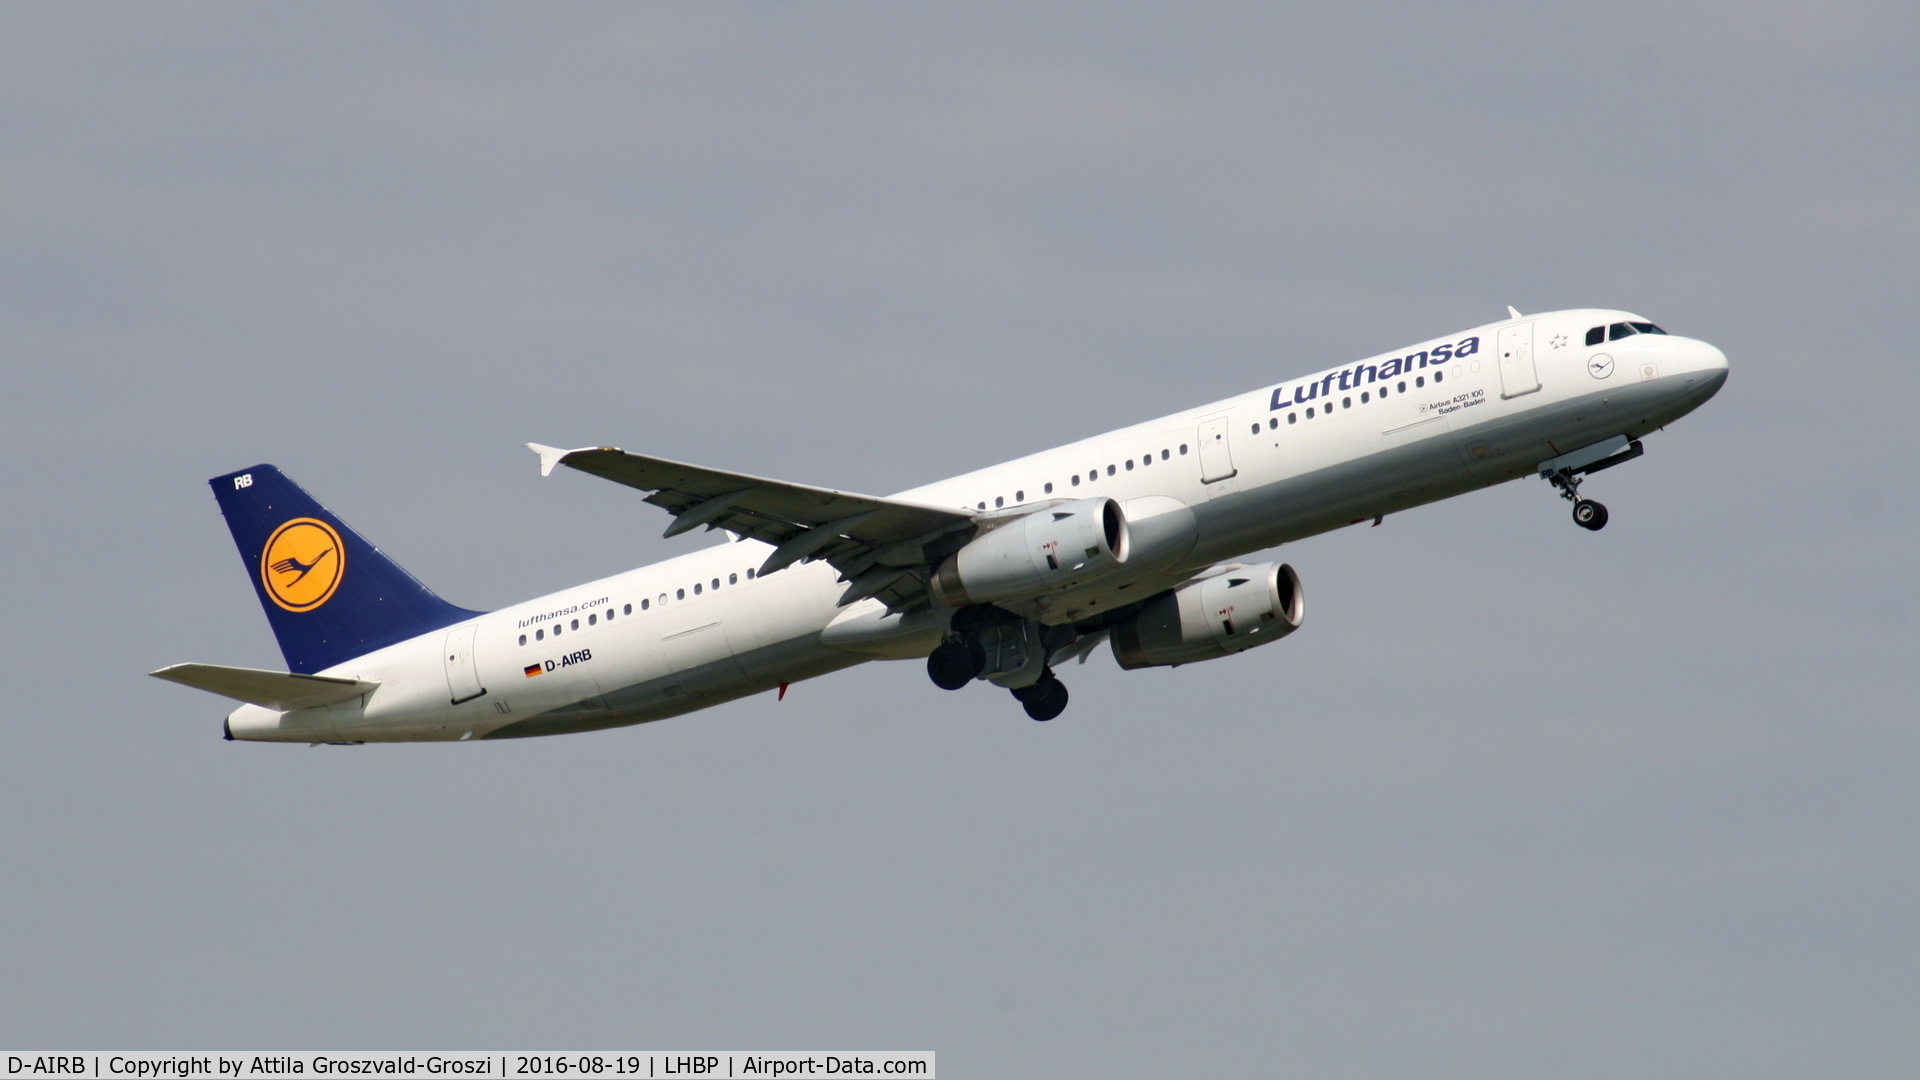 D-AIRB, 1993 Airbus A321-131 C/N 0468, Budapest Airport, Hungary - Take-off